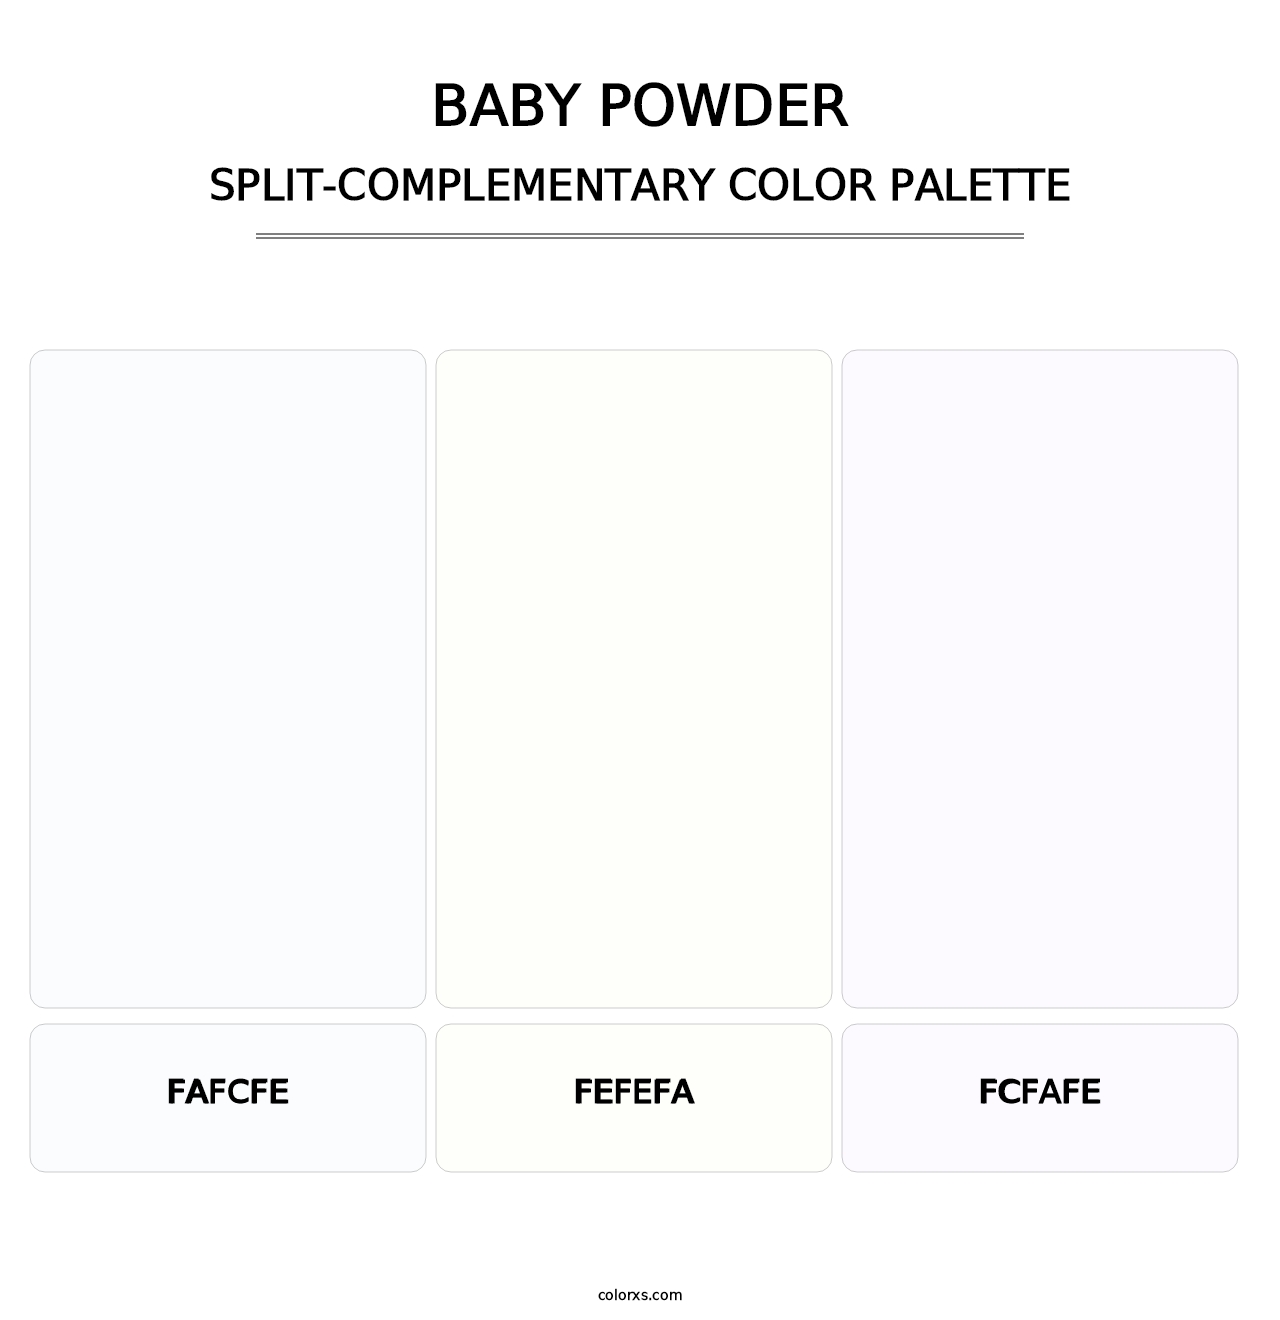 Baby Powder - Split-Complementary Color Palette